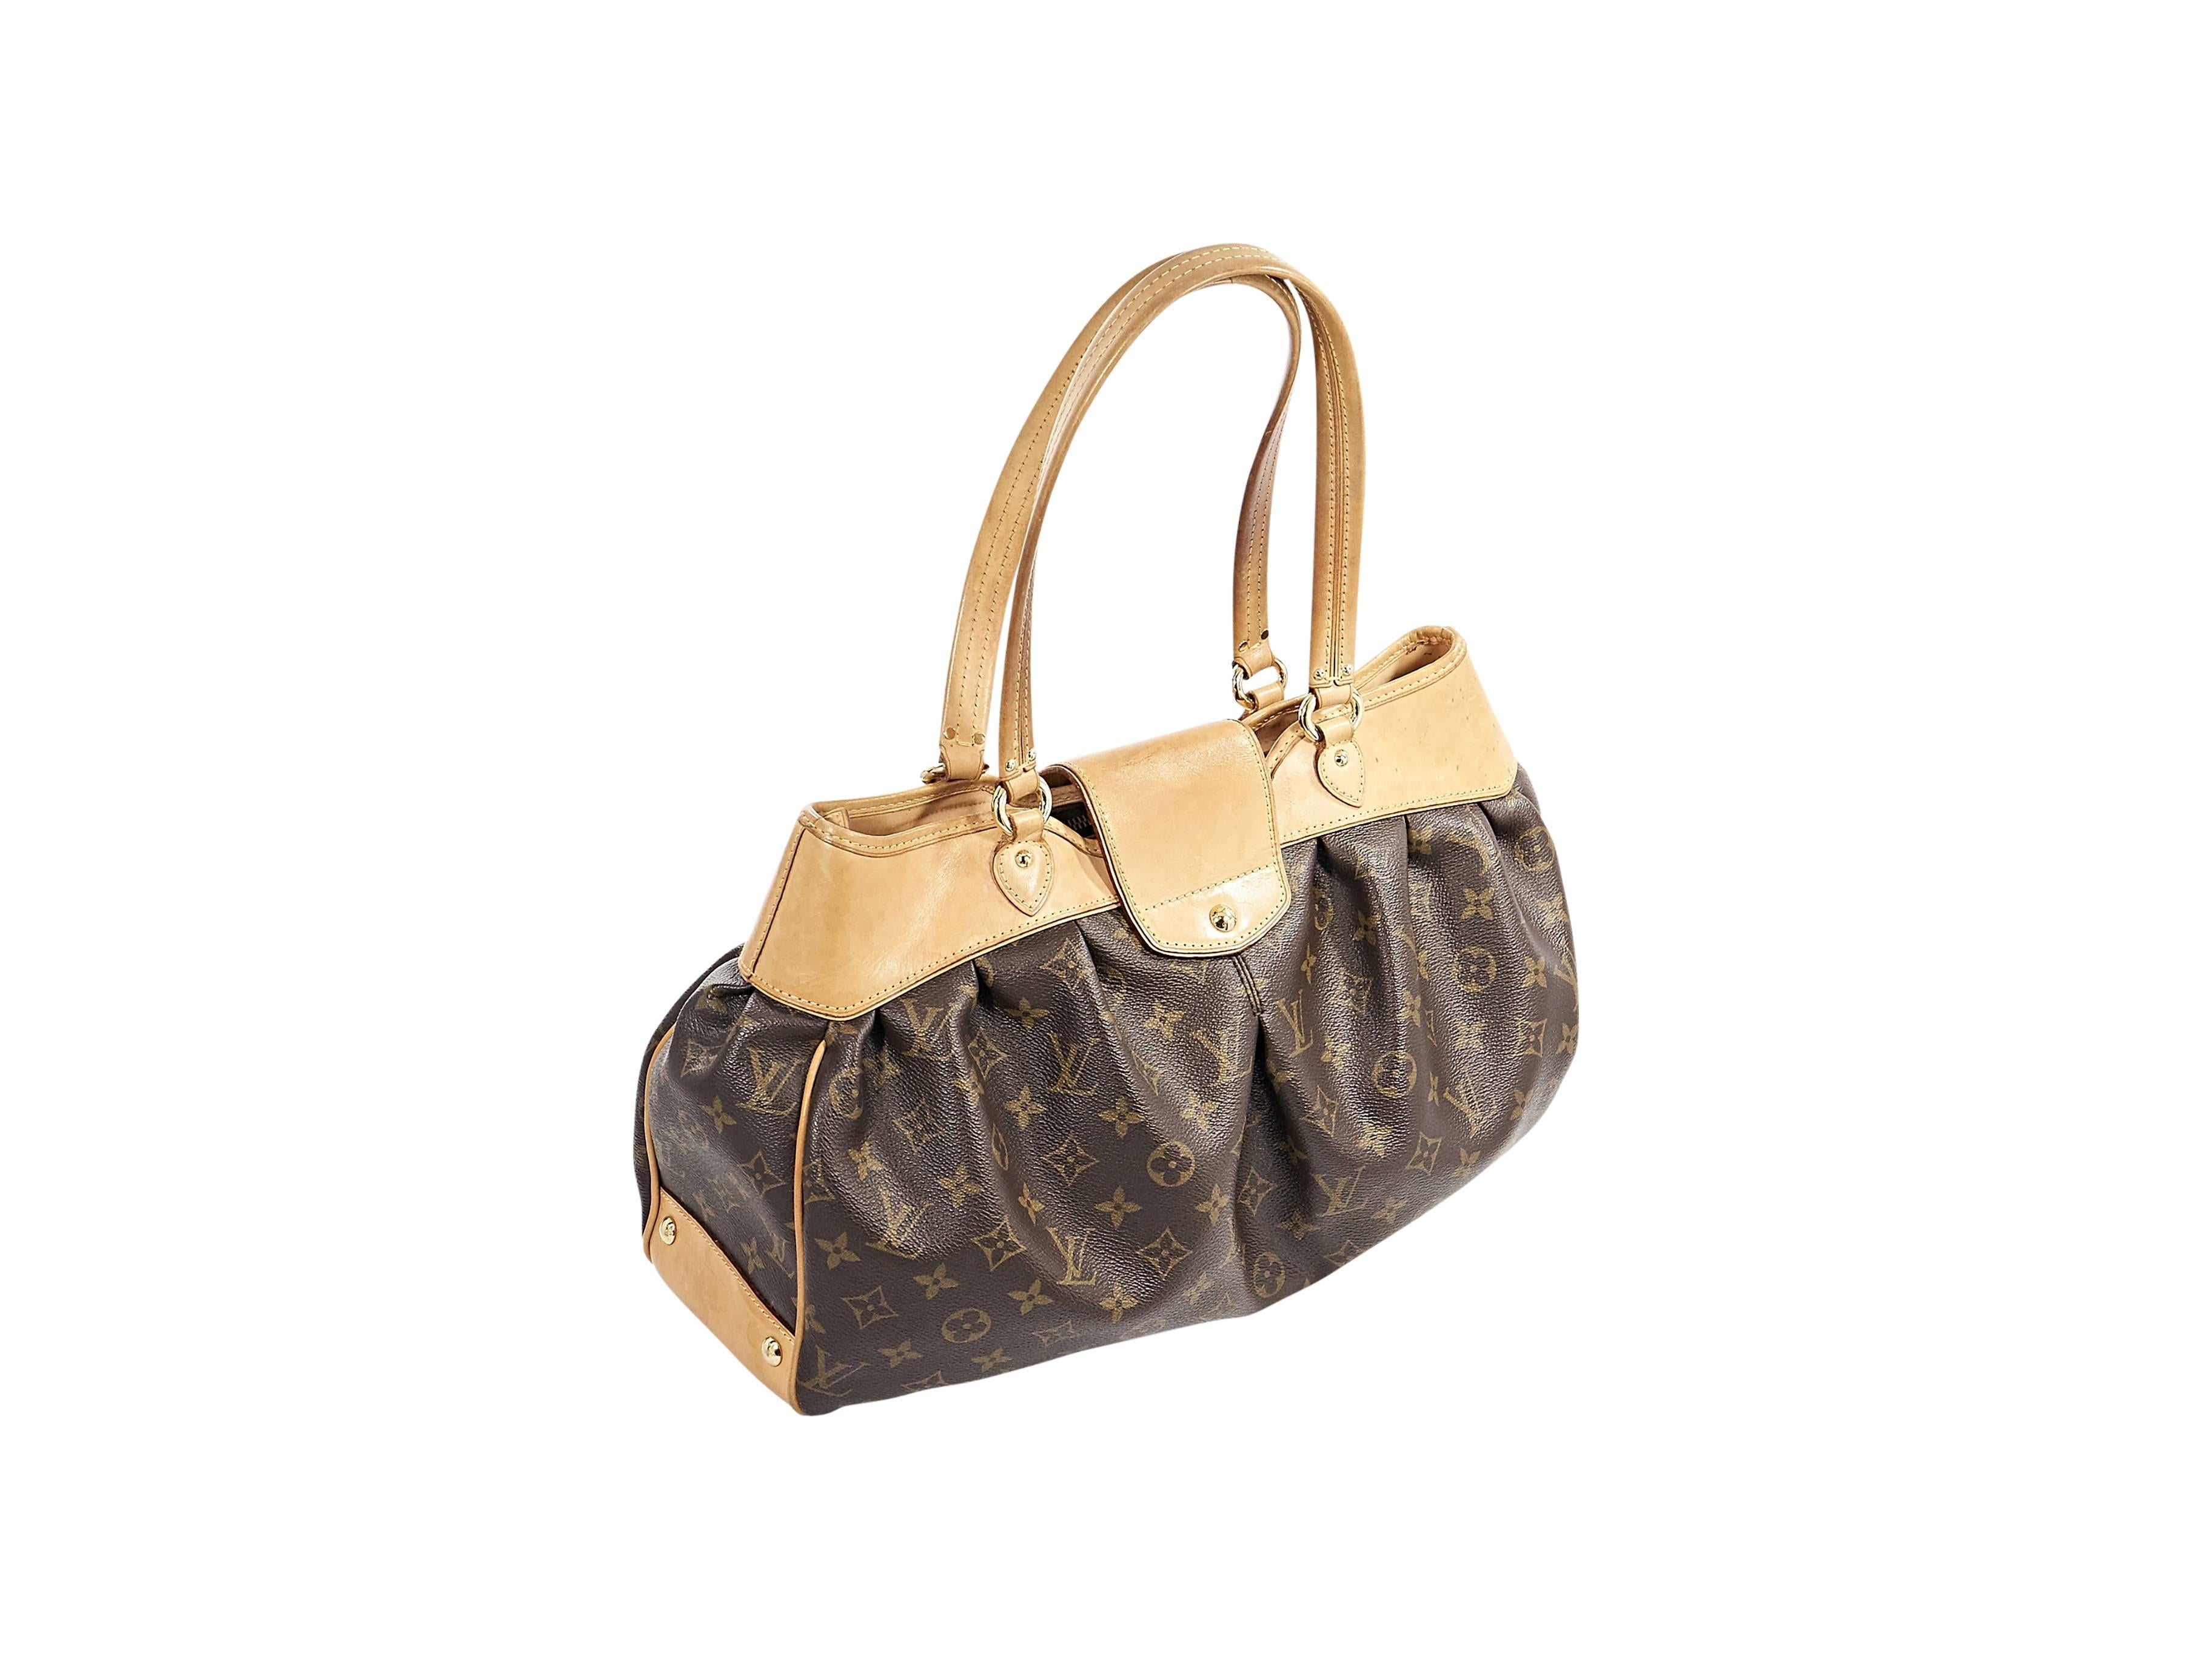 Product details:  Brown monogram canvas Bowtie PM bag by Louis Vuitton.  Trimmed with tan leather.  Dual shoulder straps.  Twist-lock strap over top zip closure.  Lined interior with inner slide pockets.  Protective metal feet.  Goldtone hardware. 